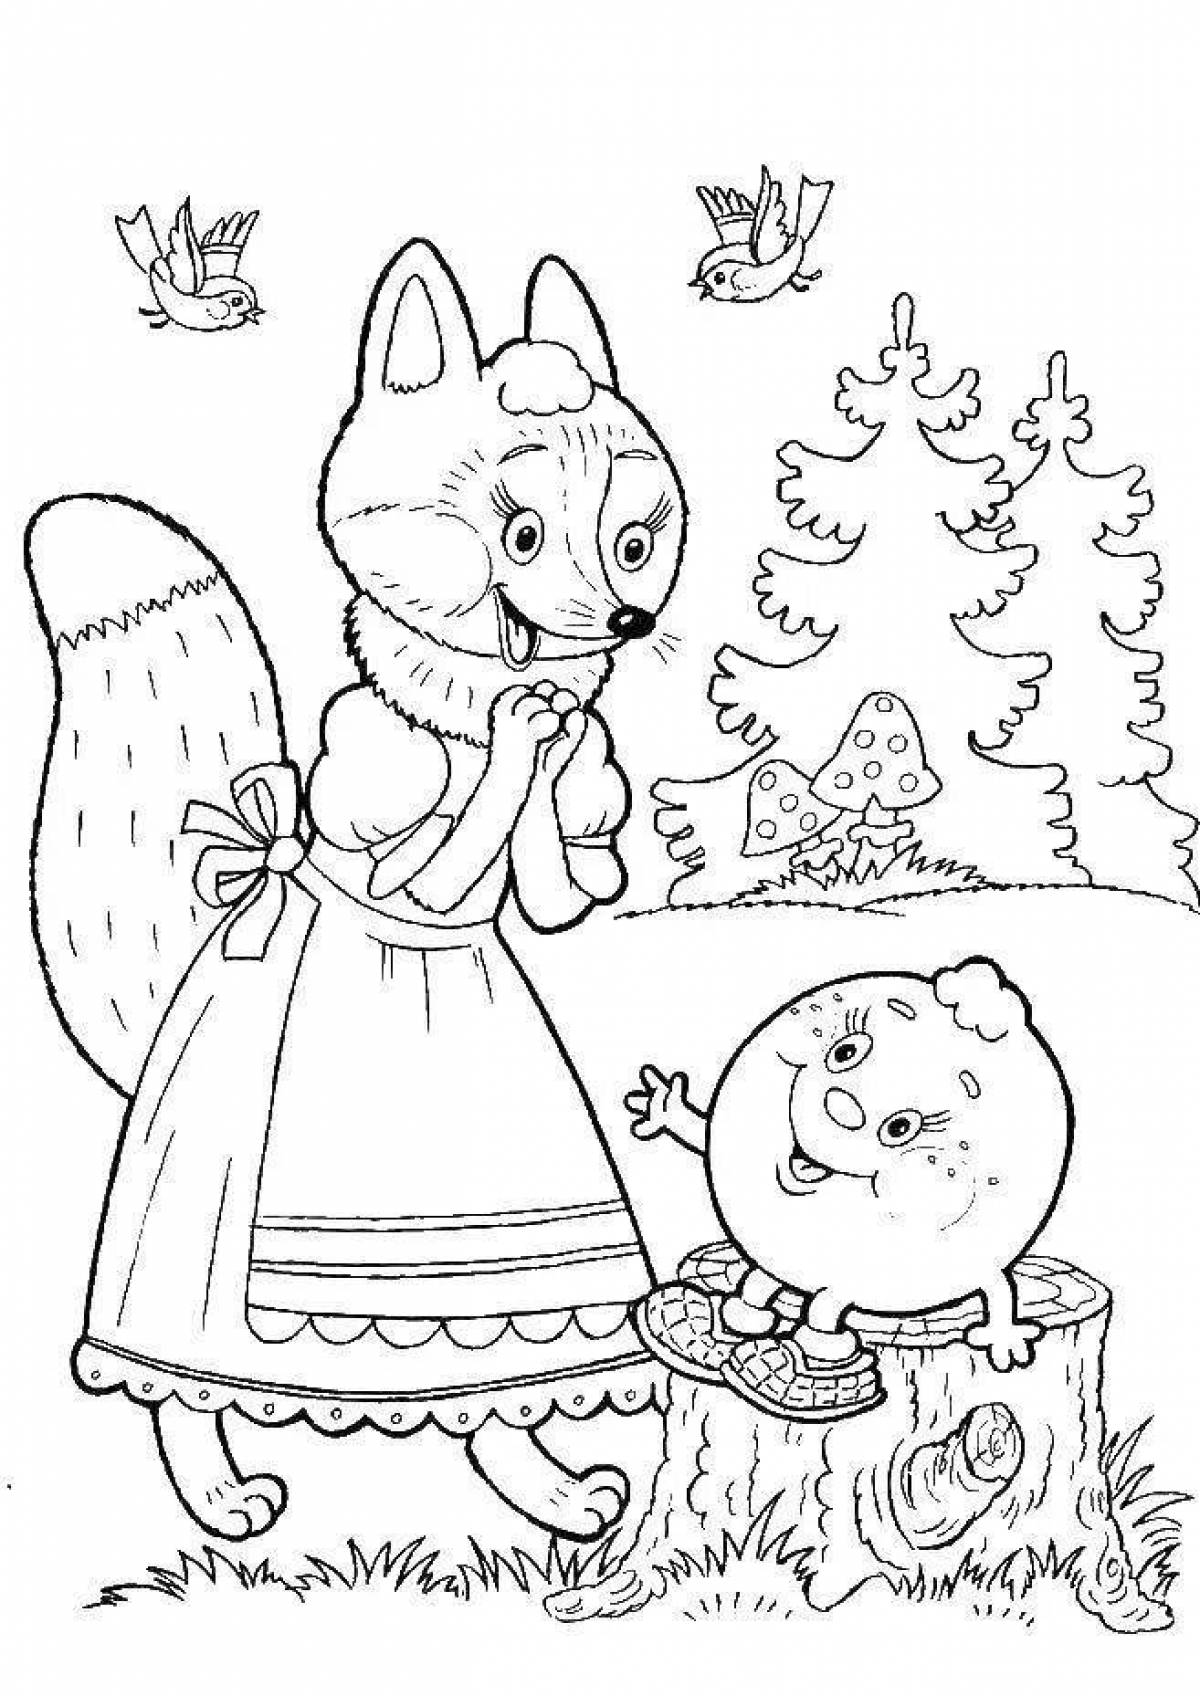 Royal coloring of fairy tale characters